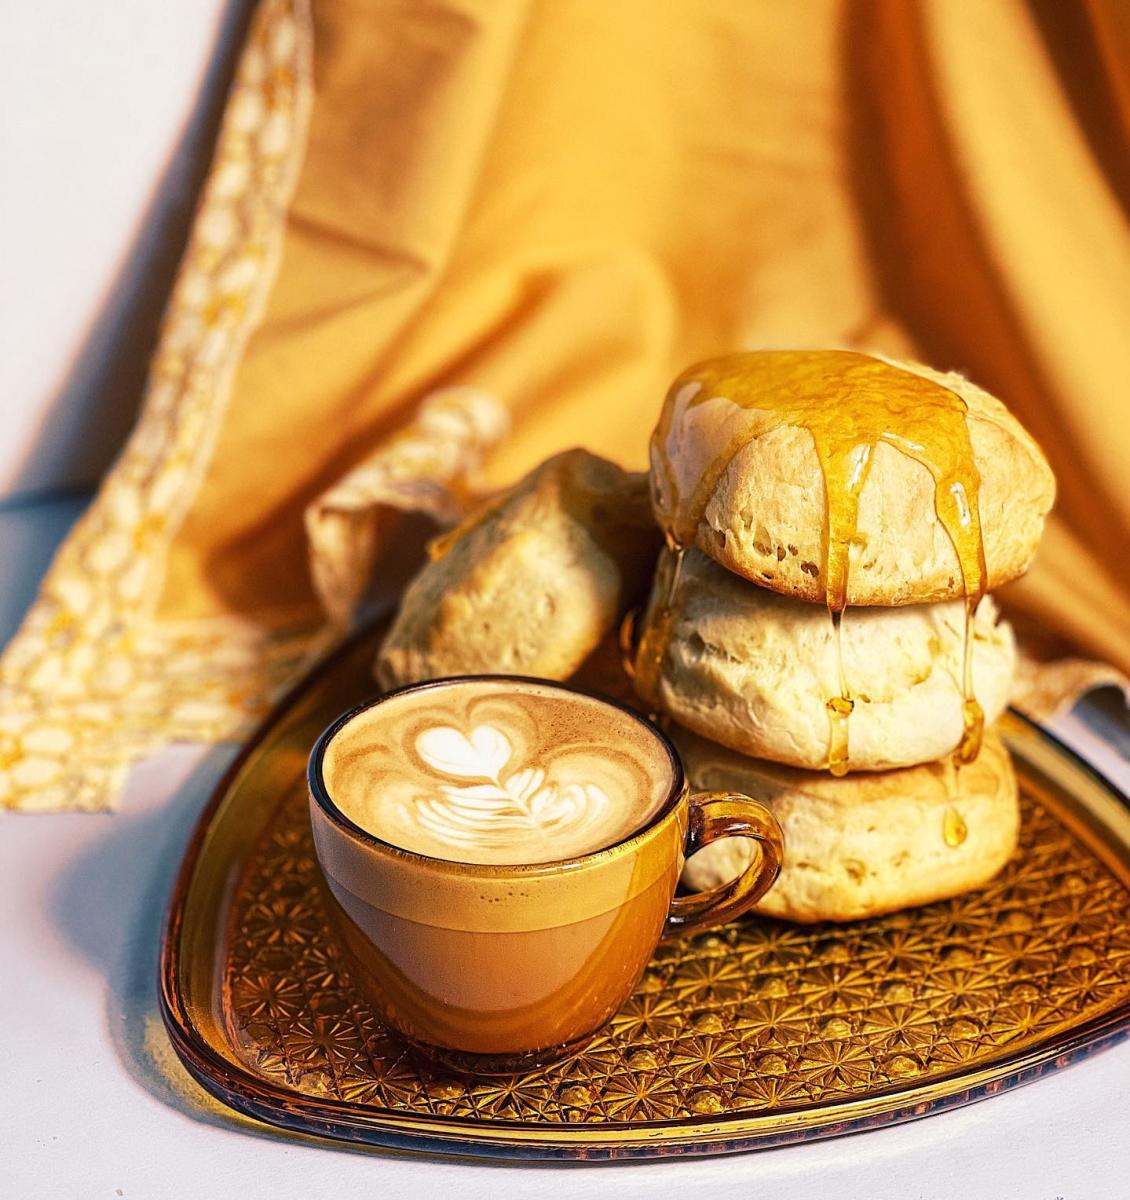 A golden-brown tray with three golden hued biscuits with honey drizzeled over it, sitting next to a brown and tan coffee mug with a late.